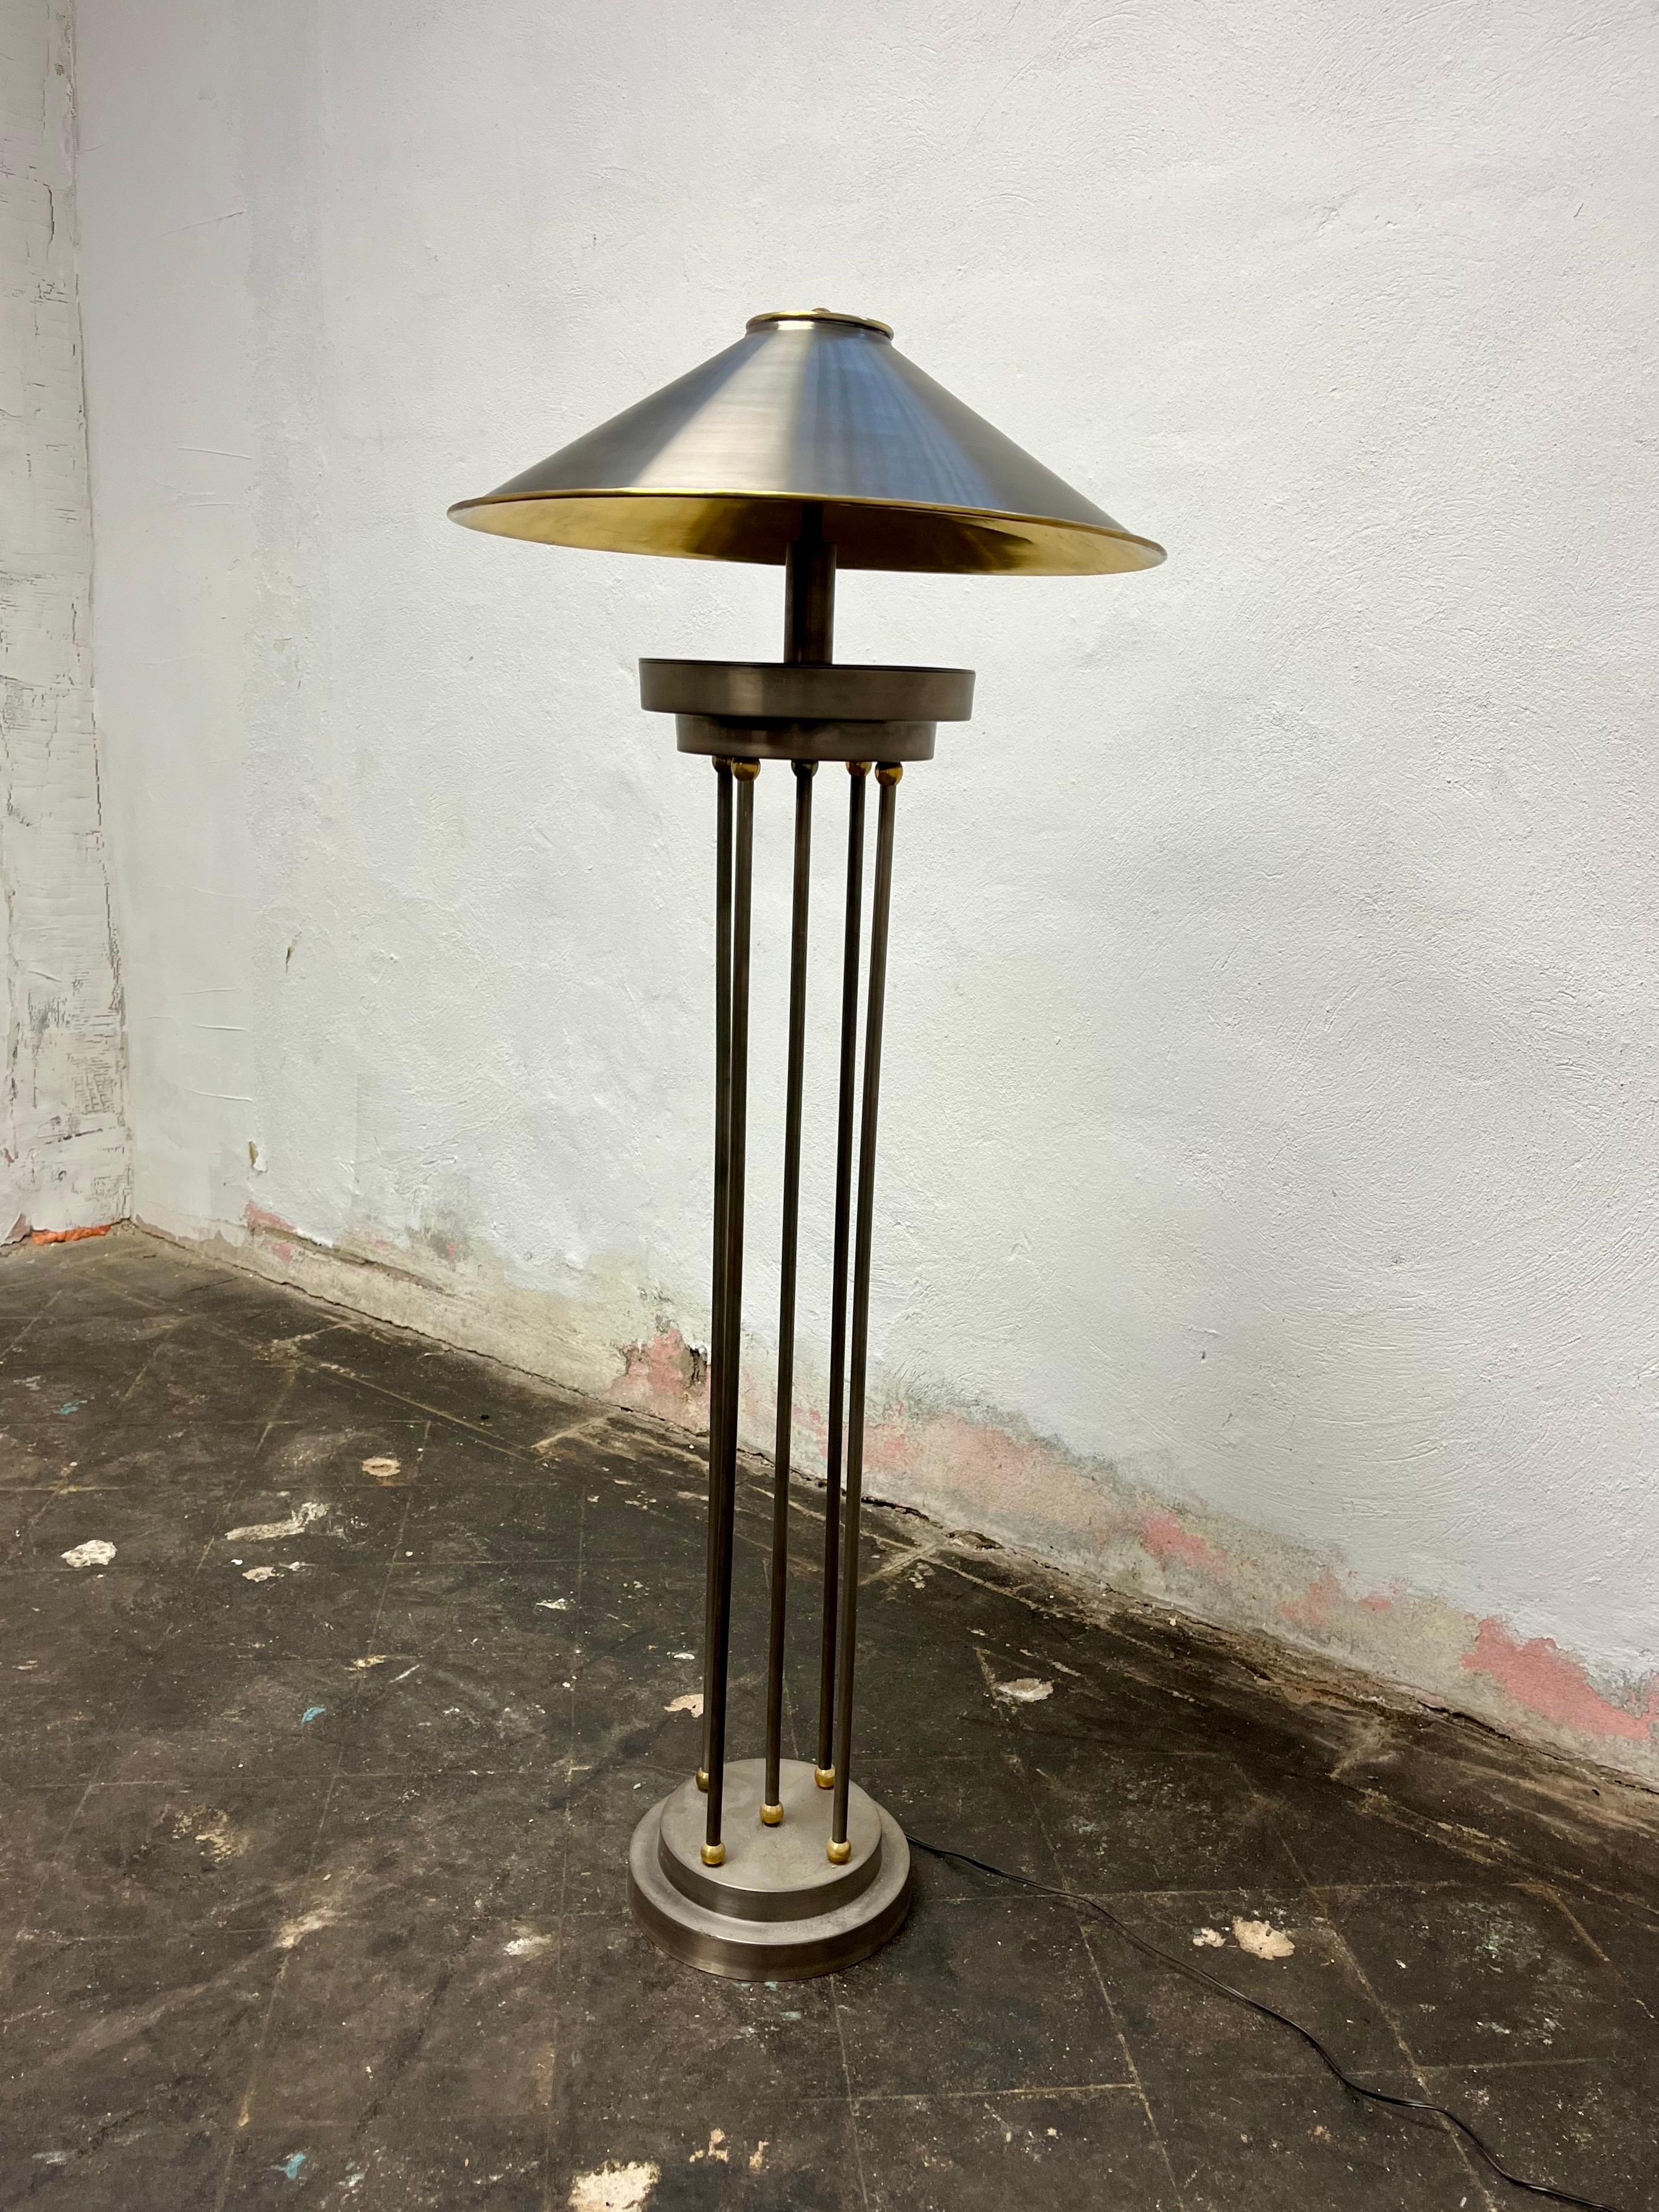 Striking post modern steel and brass columnar floor lamp. Dramatic presence with a metal shade topped with a heavy brass finial and brass interior to cast soft yet adequate lighting. 5 slender rods capped with brass balls sit atop a stepped circular